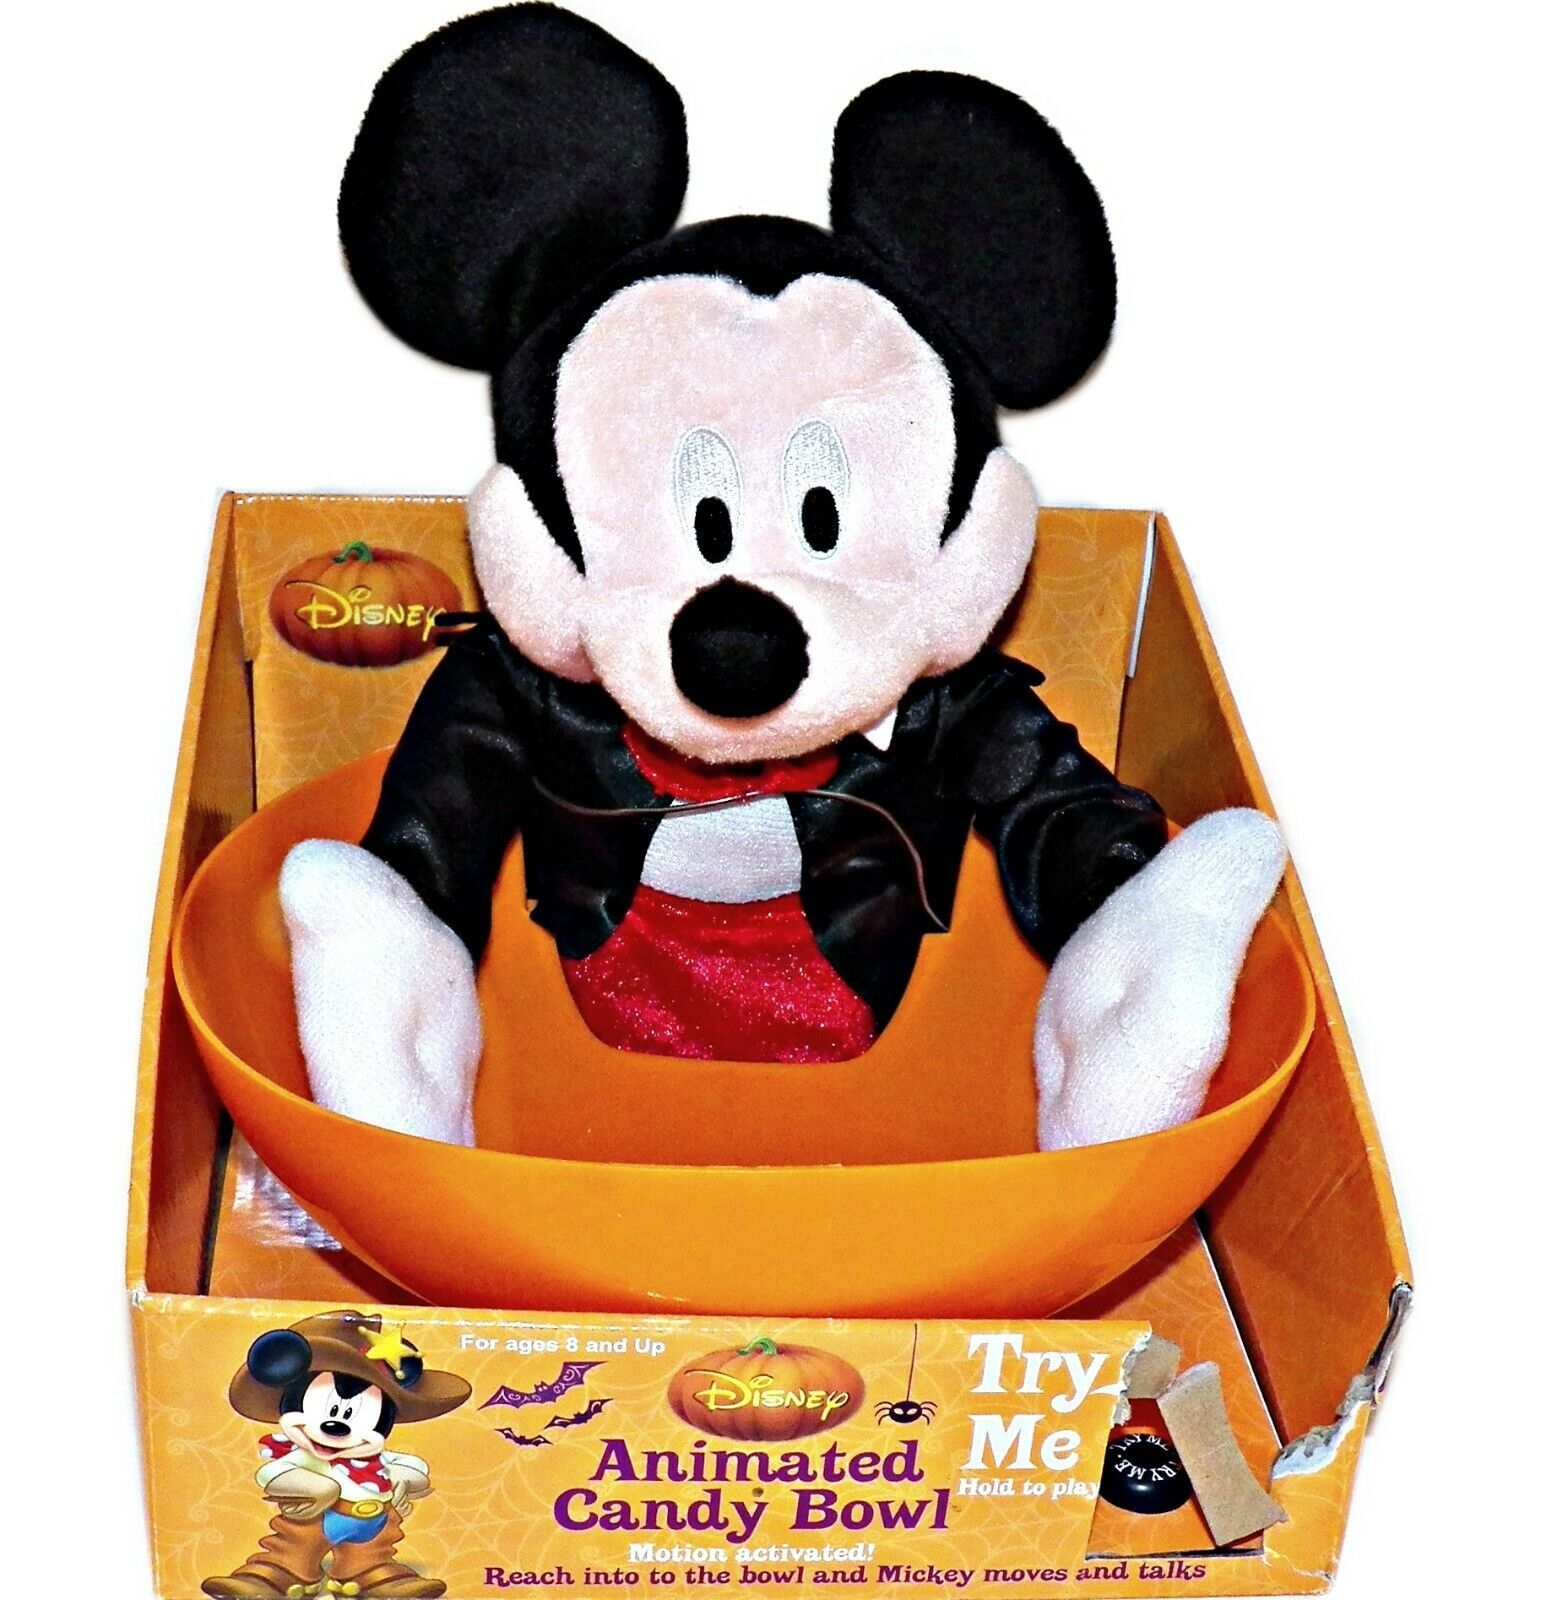 Disney Halloween Motion Activated Vampire Mickey Mouse Trick Treat Candy Bowl - $79.99